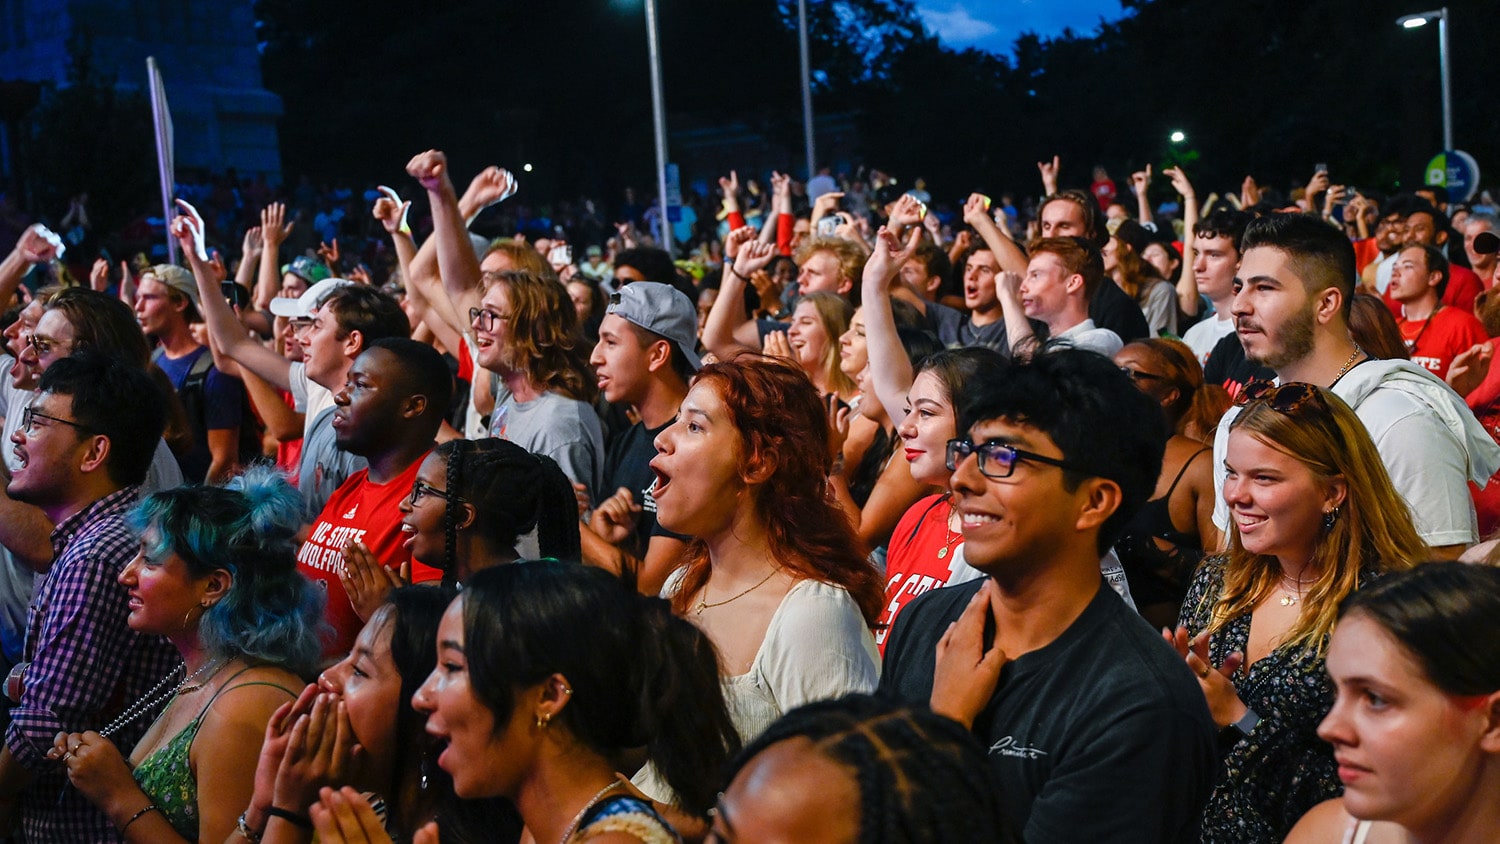 A crowd of excited students watch a performance on the Packapalooza main stage.